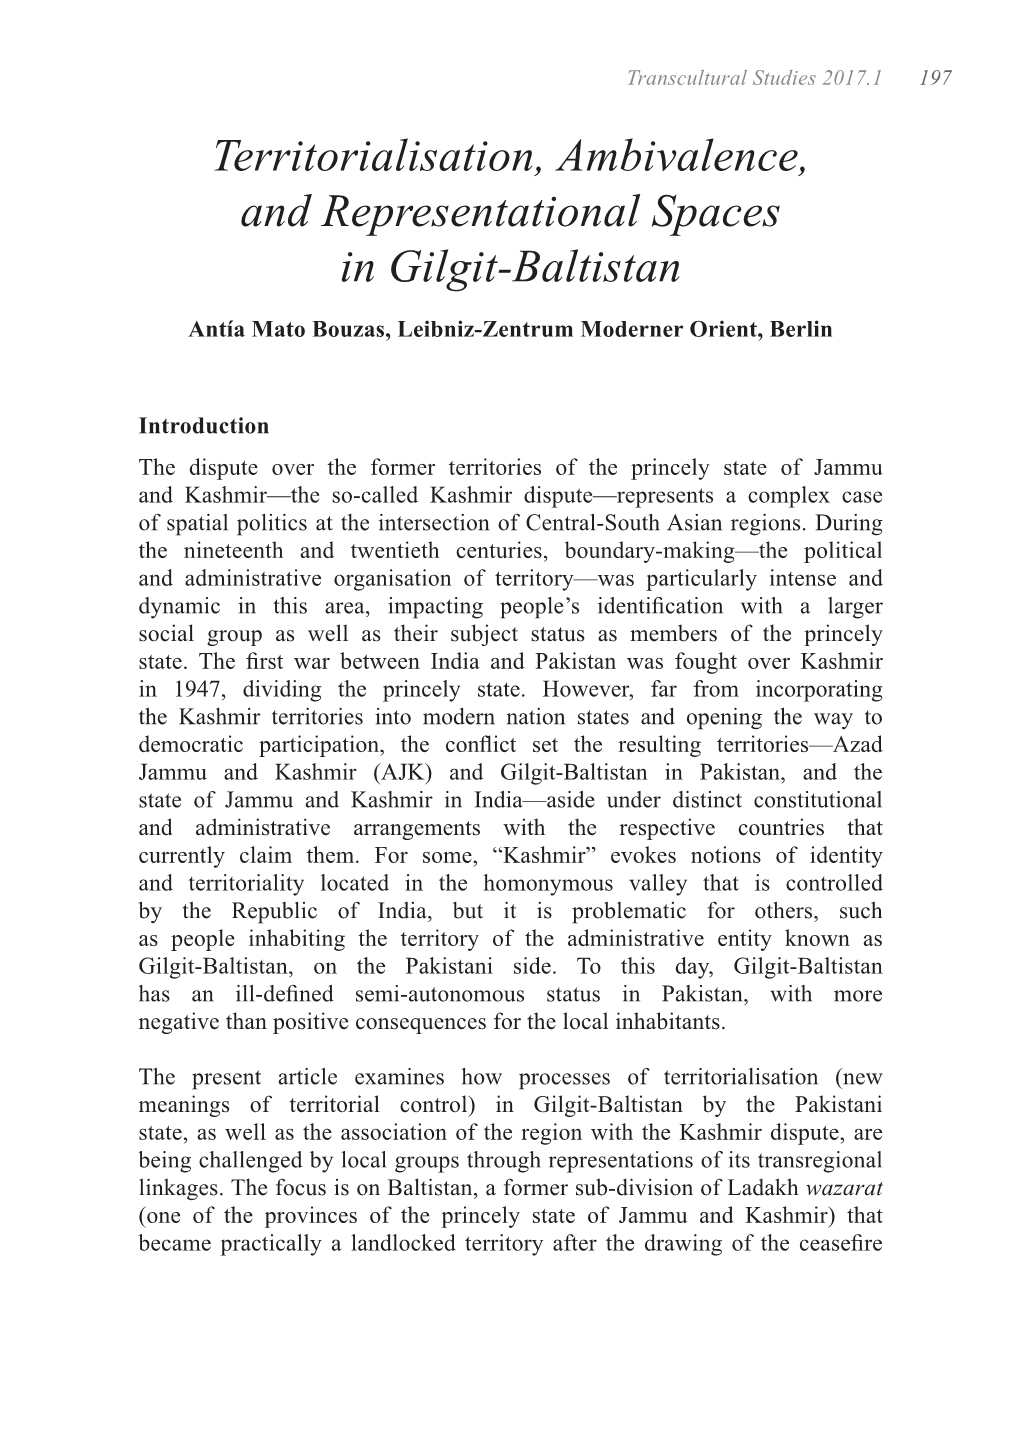 Territorialisation, Ambivalence, and Representational Spaces in Gilgit-Baltistan